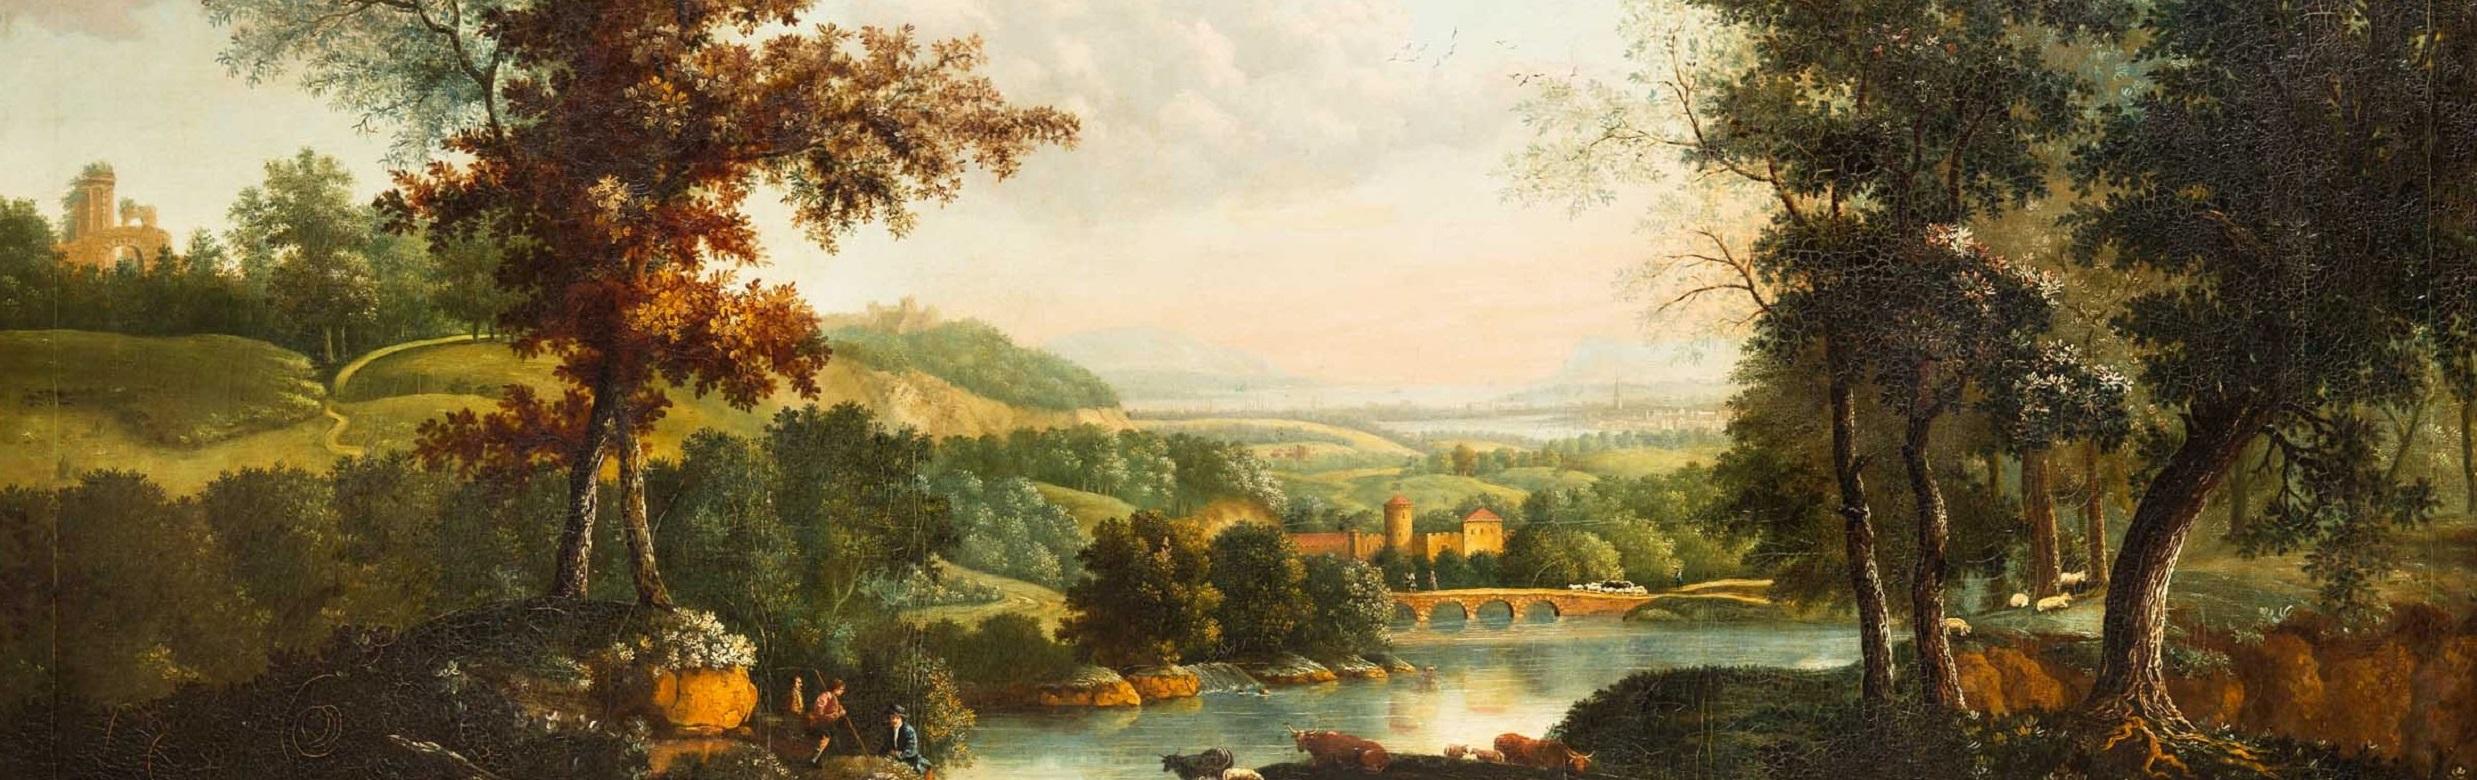 Romantic Huge Landscape Painting of “Second Premium” Attr. John Smith of Chichester For Sale